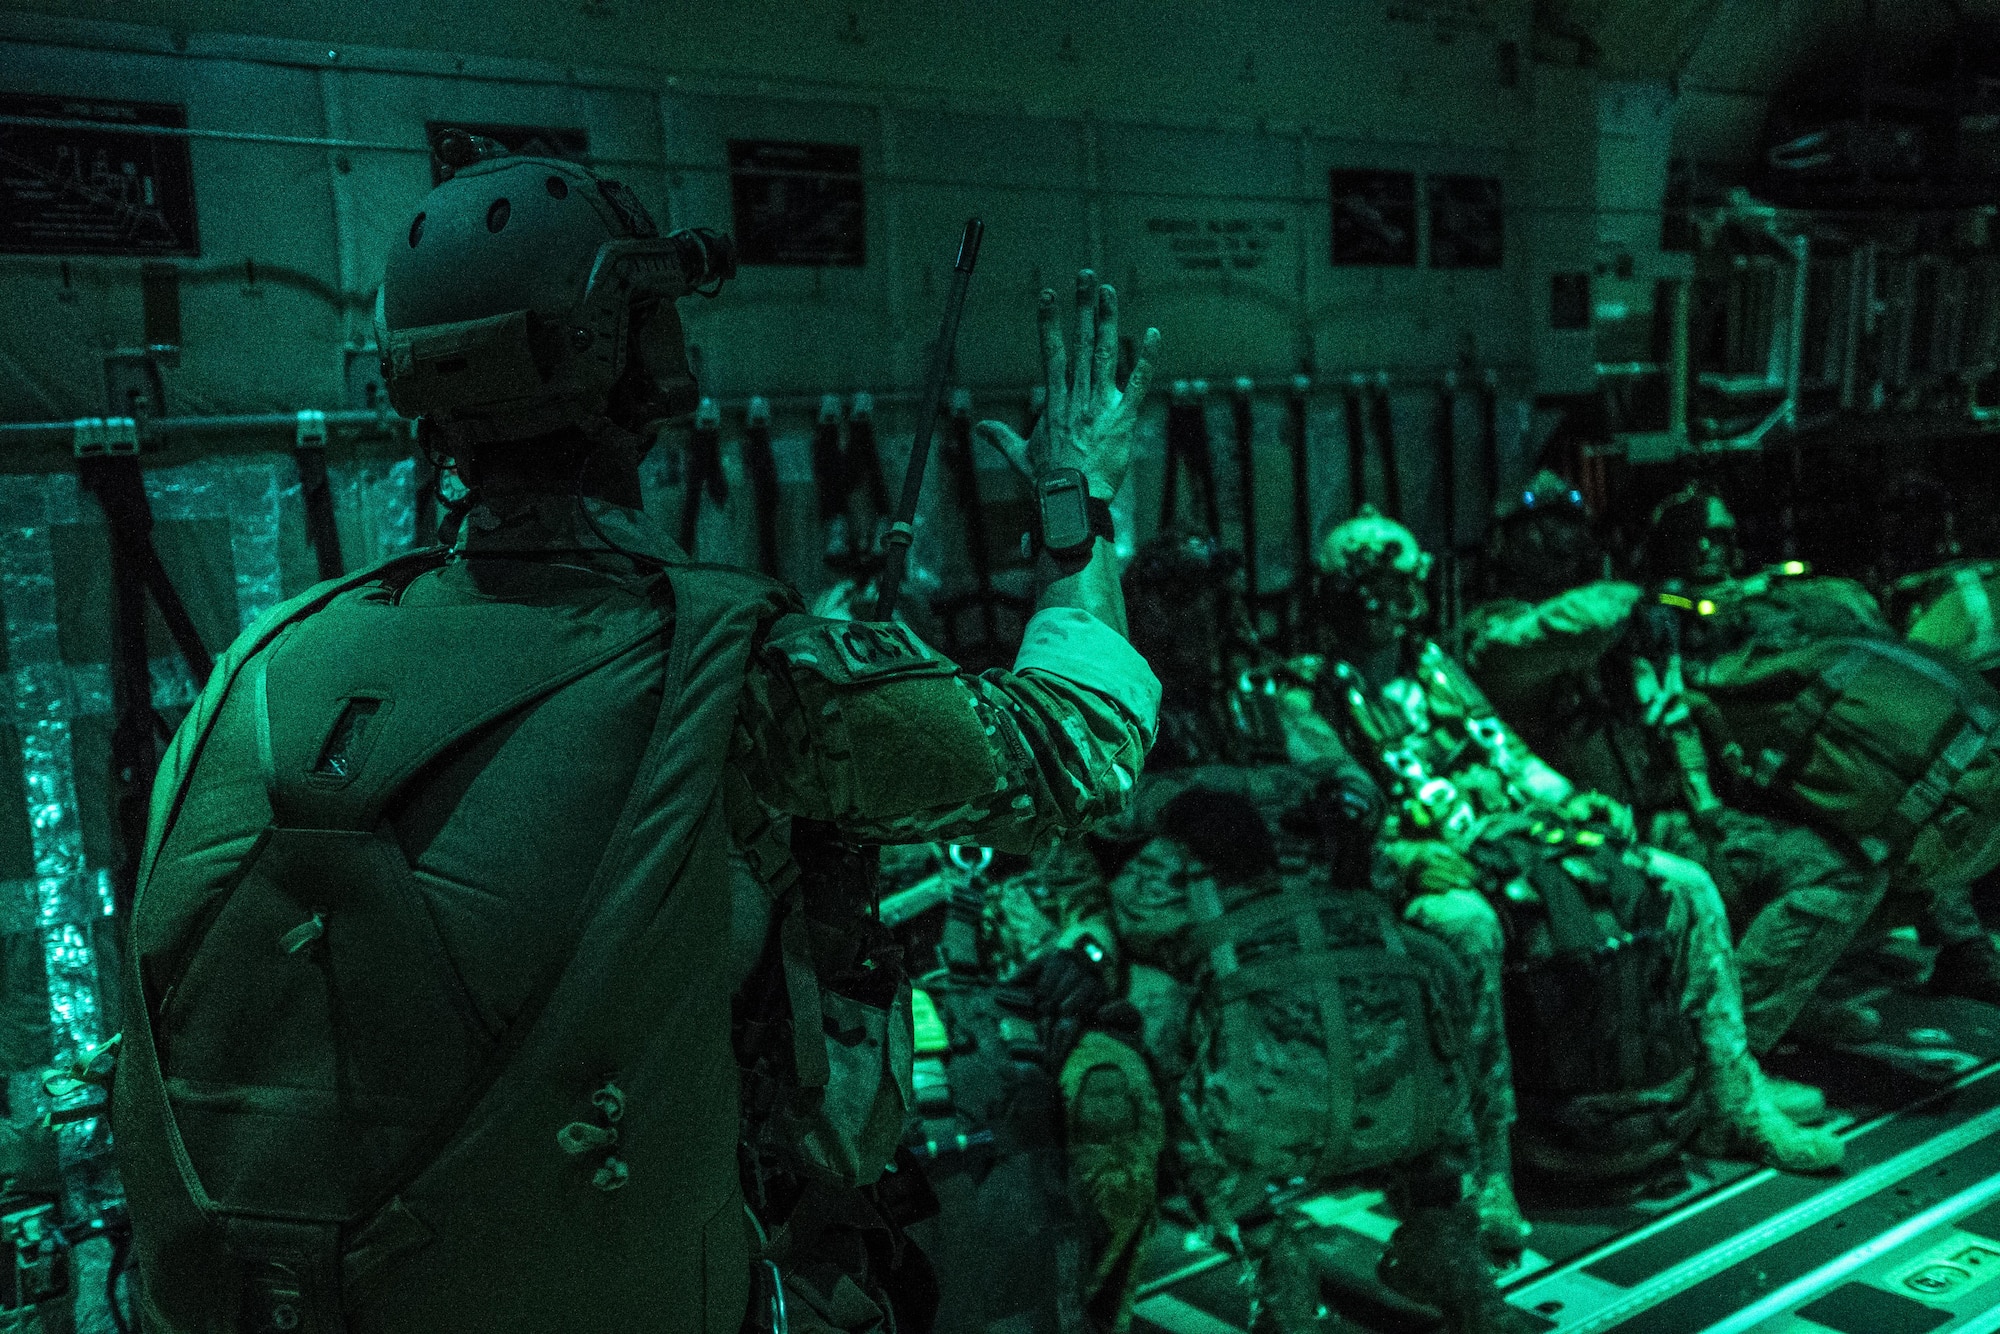 A U.S. Air Force 320th Special Tactics Squadron jumpmaster signals the time prior to high altitude, high opening (HAHO) jump operations July 11, 2017, over Shoalwater Bay Training Area in Queensland, Australia during Talisman Saber 2017. The 320th STS combat controllers and U.S. Marine Corps 3rd Reconnaissance Battalion operators infilled two days prior to the exercise’s massive tactical (MASS TAC) airdrop of 500 jumpers in order to establish the drop zone. (U.S. Air Force photo by Capt. Jessica Tait)